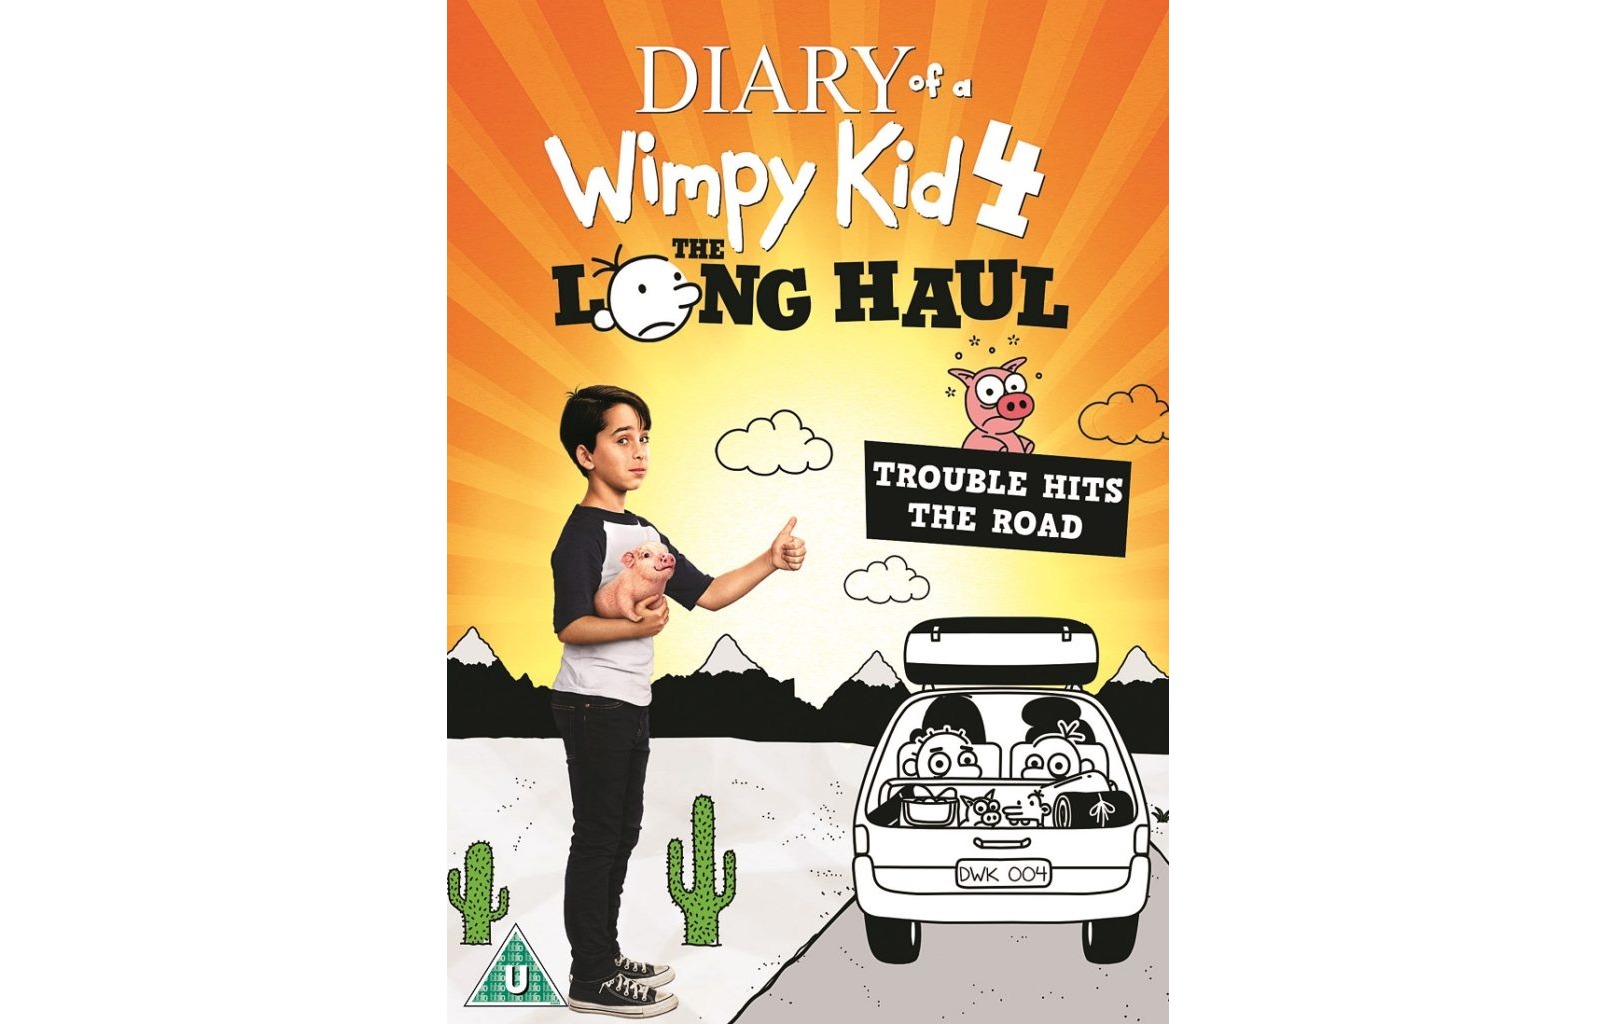 diary-of-a-wimpy-kid-the-long-haul-tickets-the-cove-theater